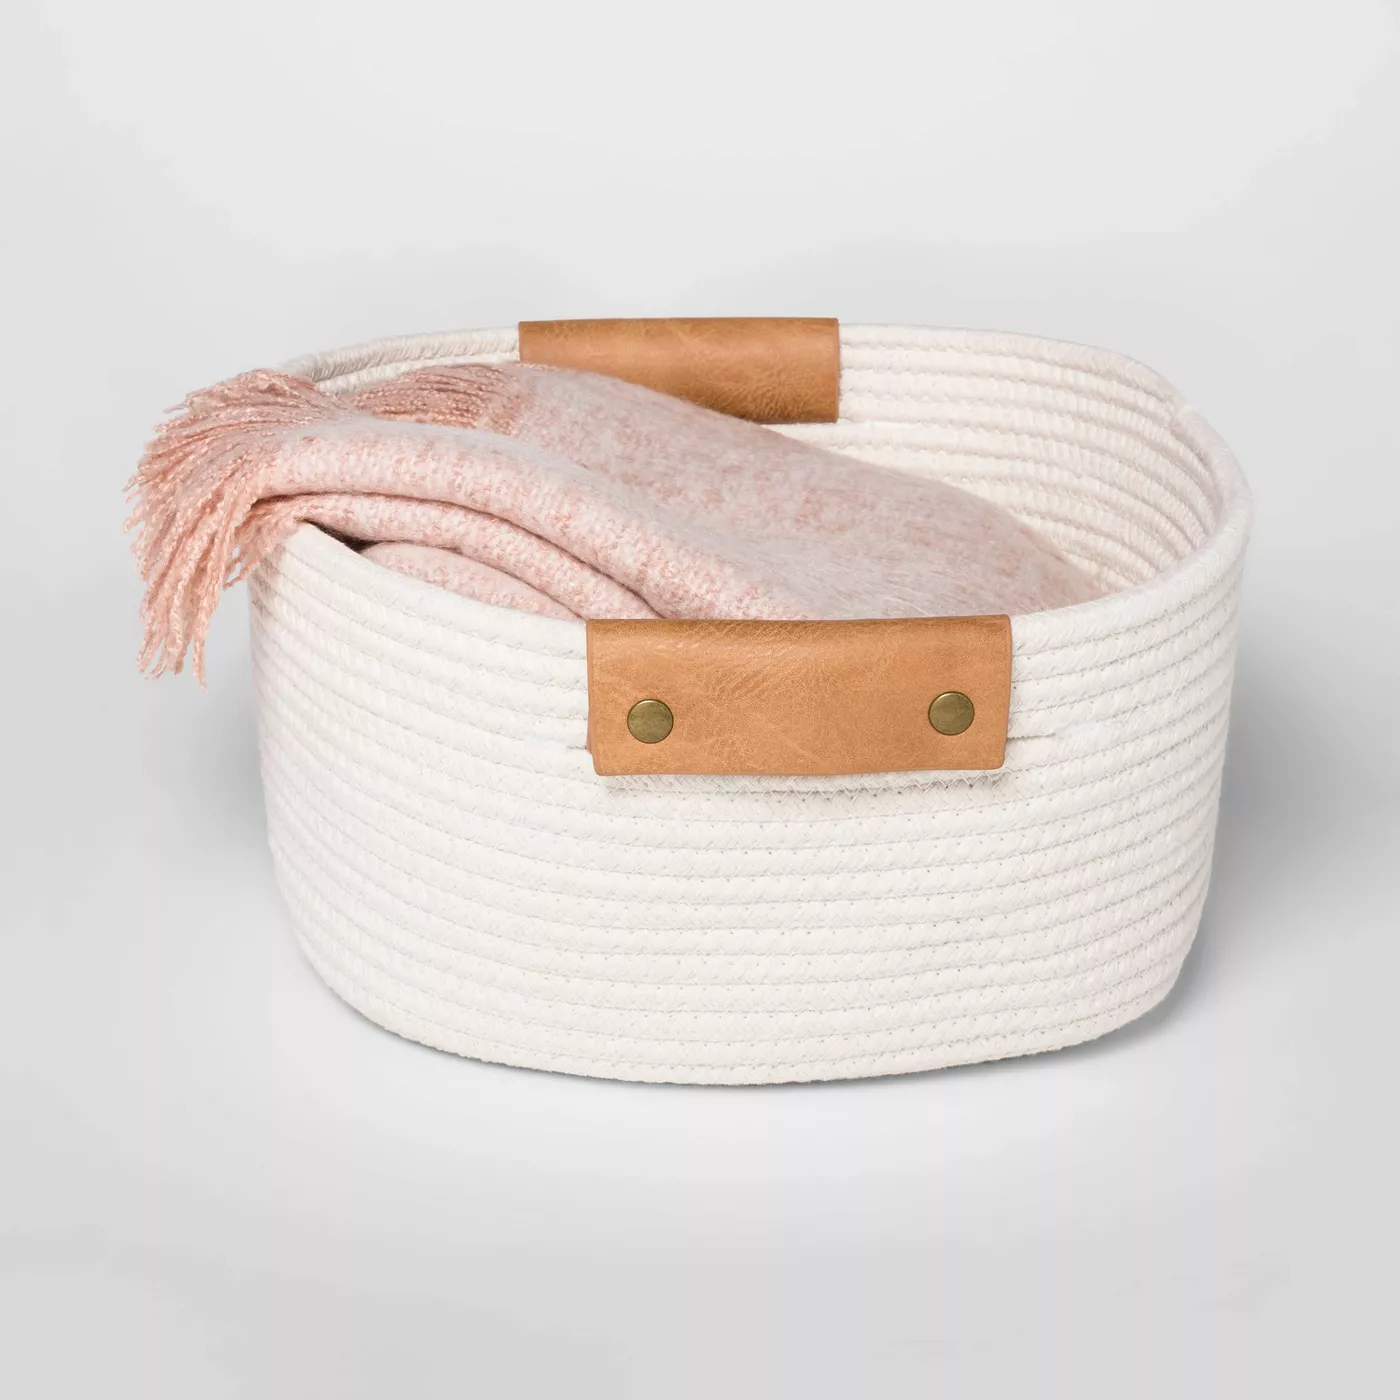 Decorative Coiled Rope Square Base Tapered Basket Small White 13" - Threshold™ - image 2 of 5